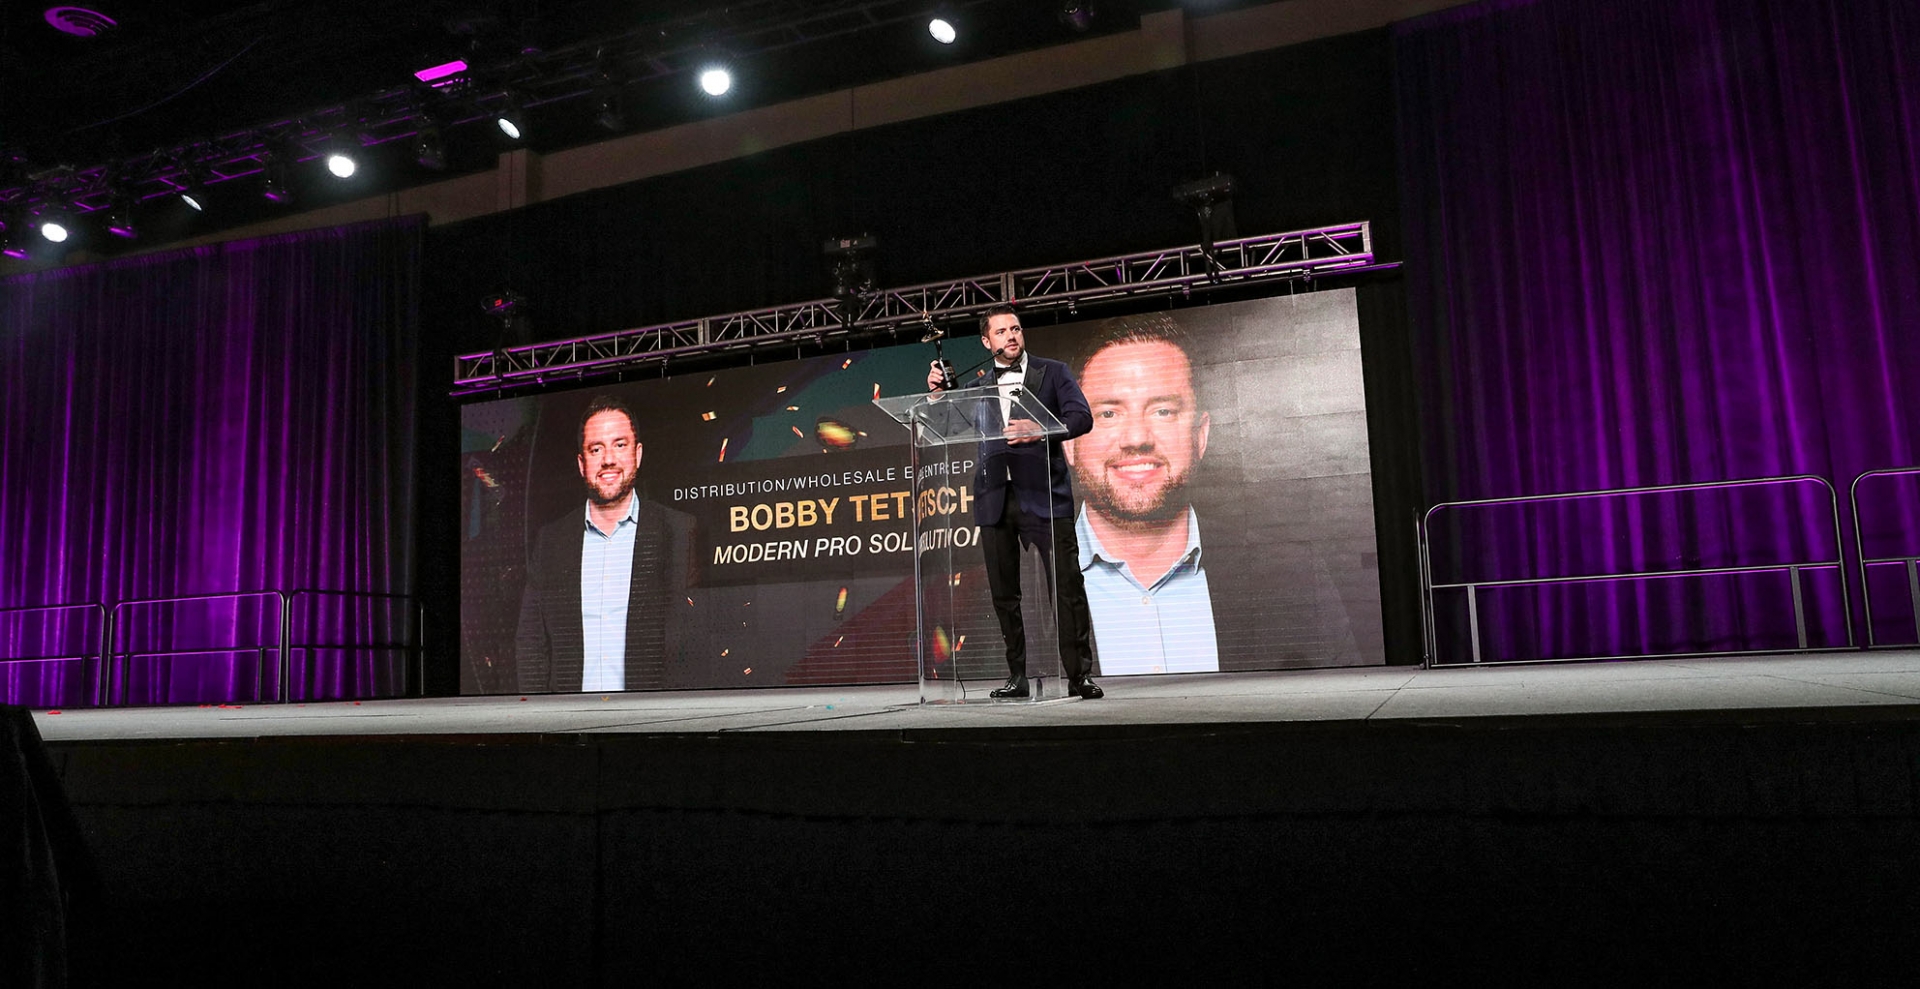 Best of the Best Entrepreneur and Distribution/Wholesale Entrepreneur – Bobby Tetsch, Modern Pro Solutions, Chino